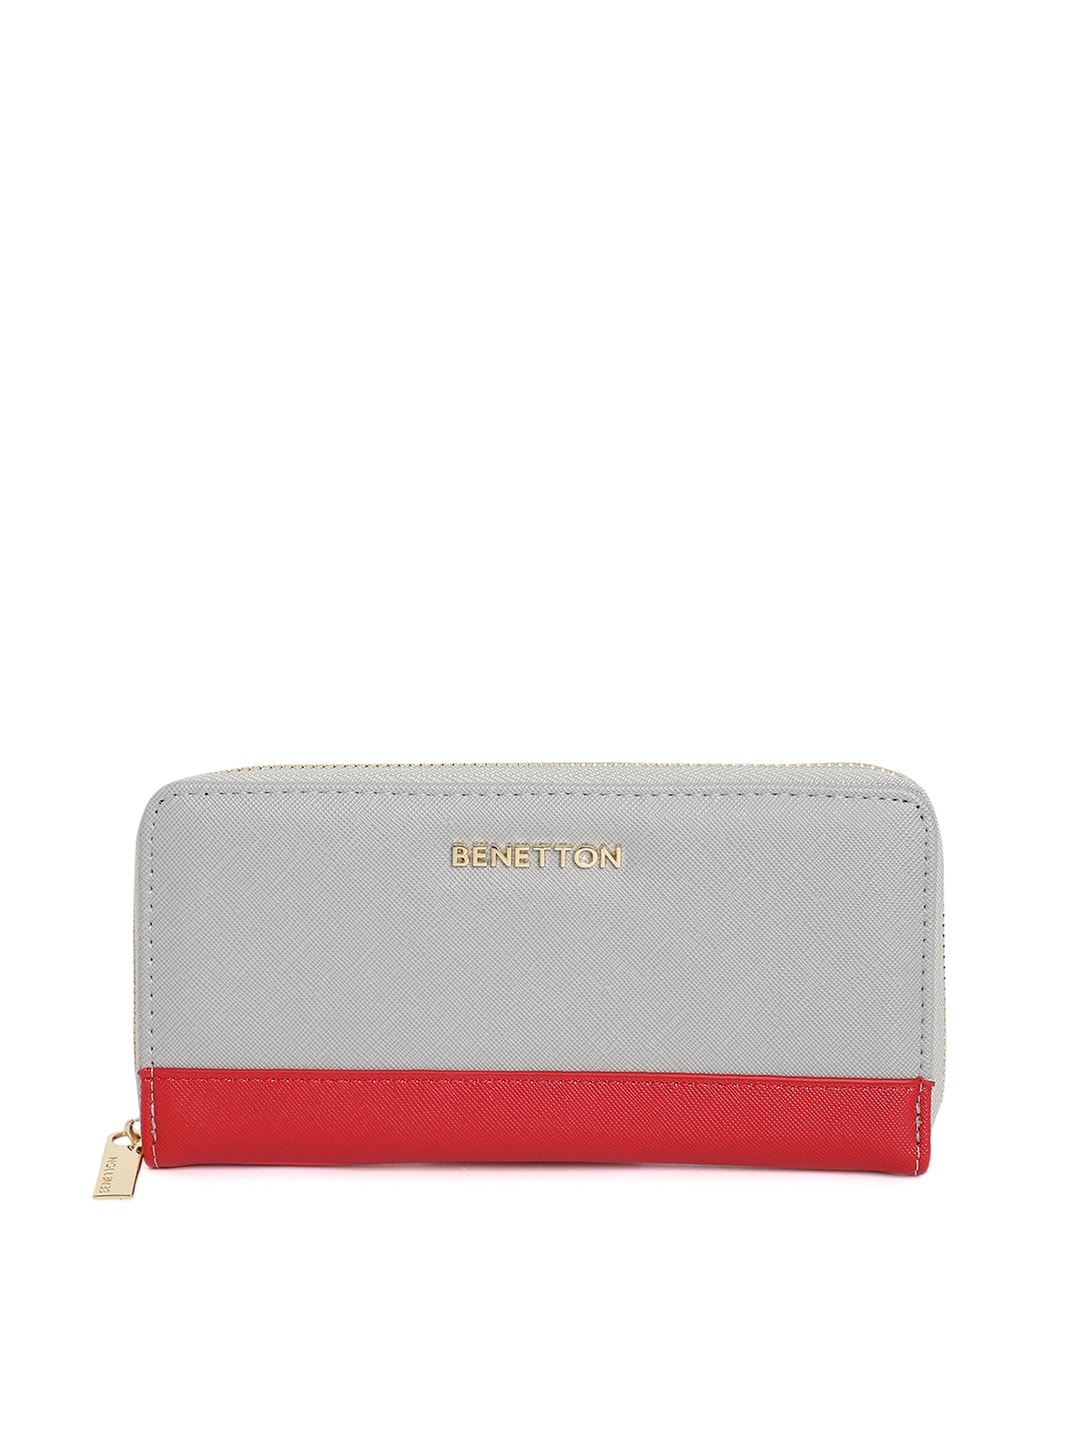 United Colors of Benetton Women Grey & Red Colourblocked Synthetic Leather Zip Around Wallet Price in India